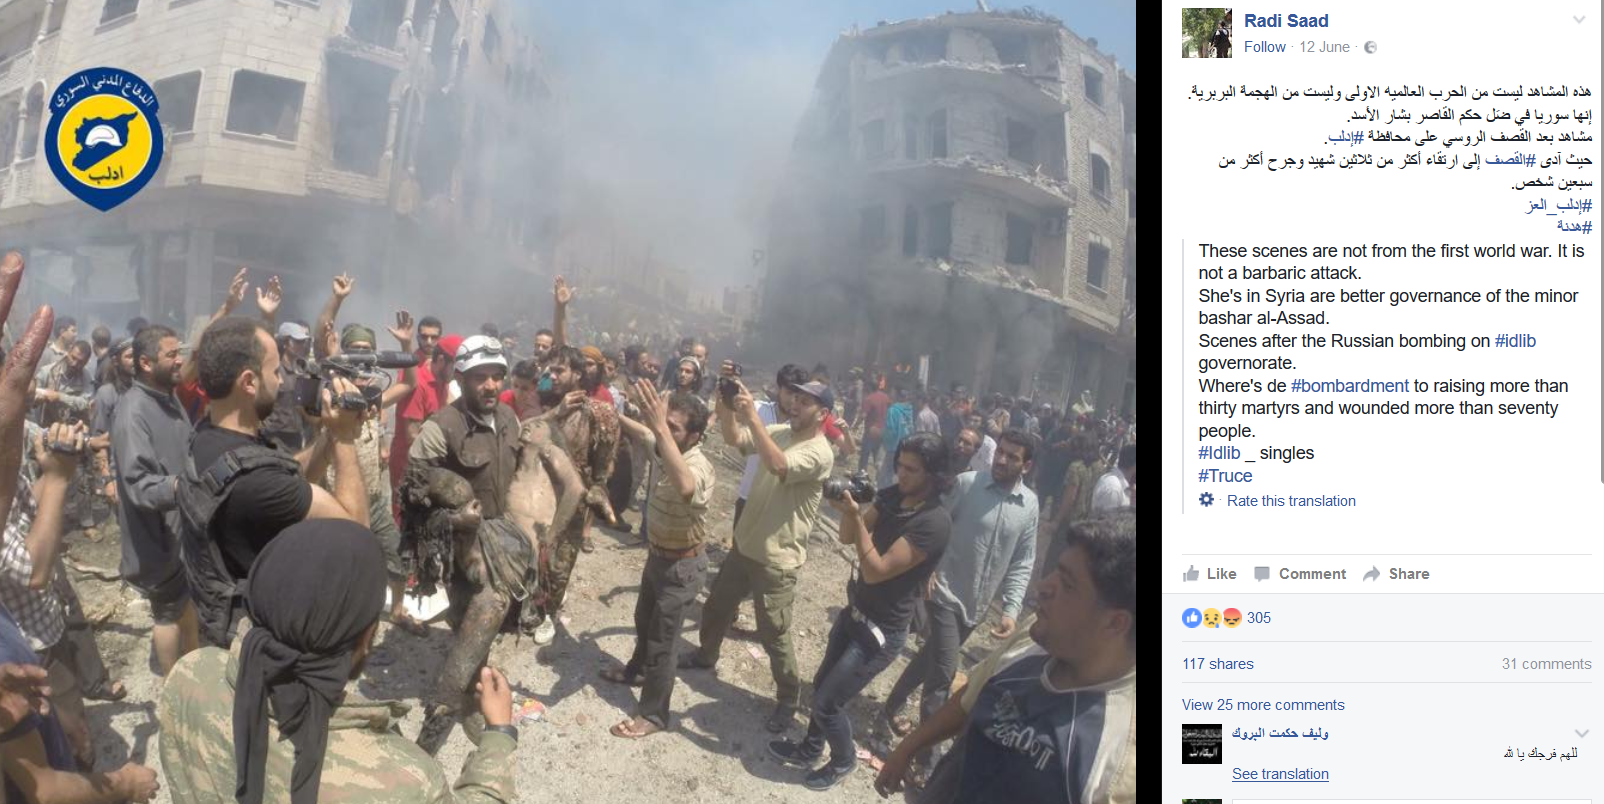 In June 2016, Muawiya Hassan Agha was spotted photographing a White Helmet rescue, despite claims that the White Helmets had sacked him and condemned his involvement in an extrajudicial execution. Agha is on right, holding a camera and dressed in black. (Screenshot of Facebook page)